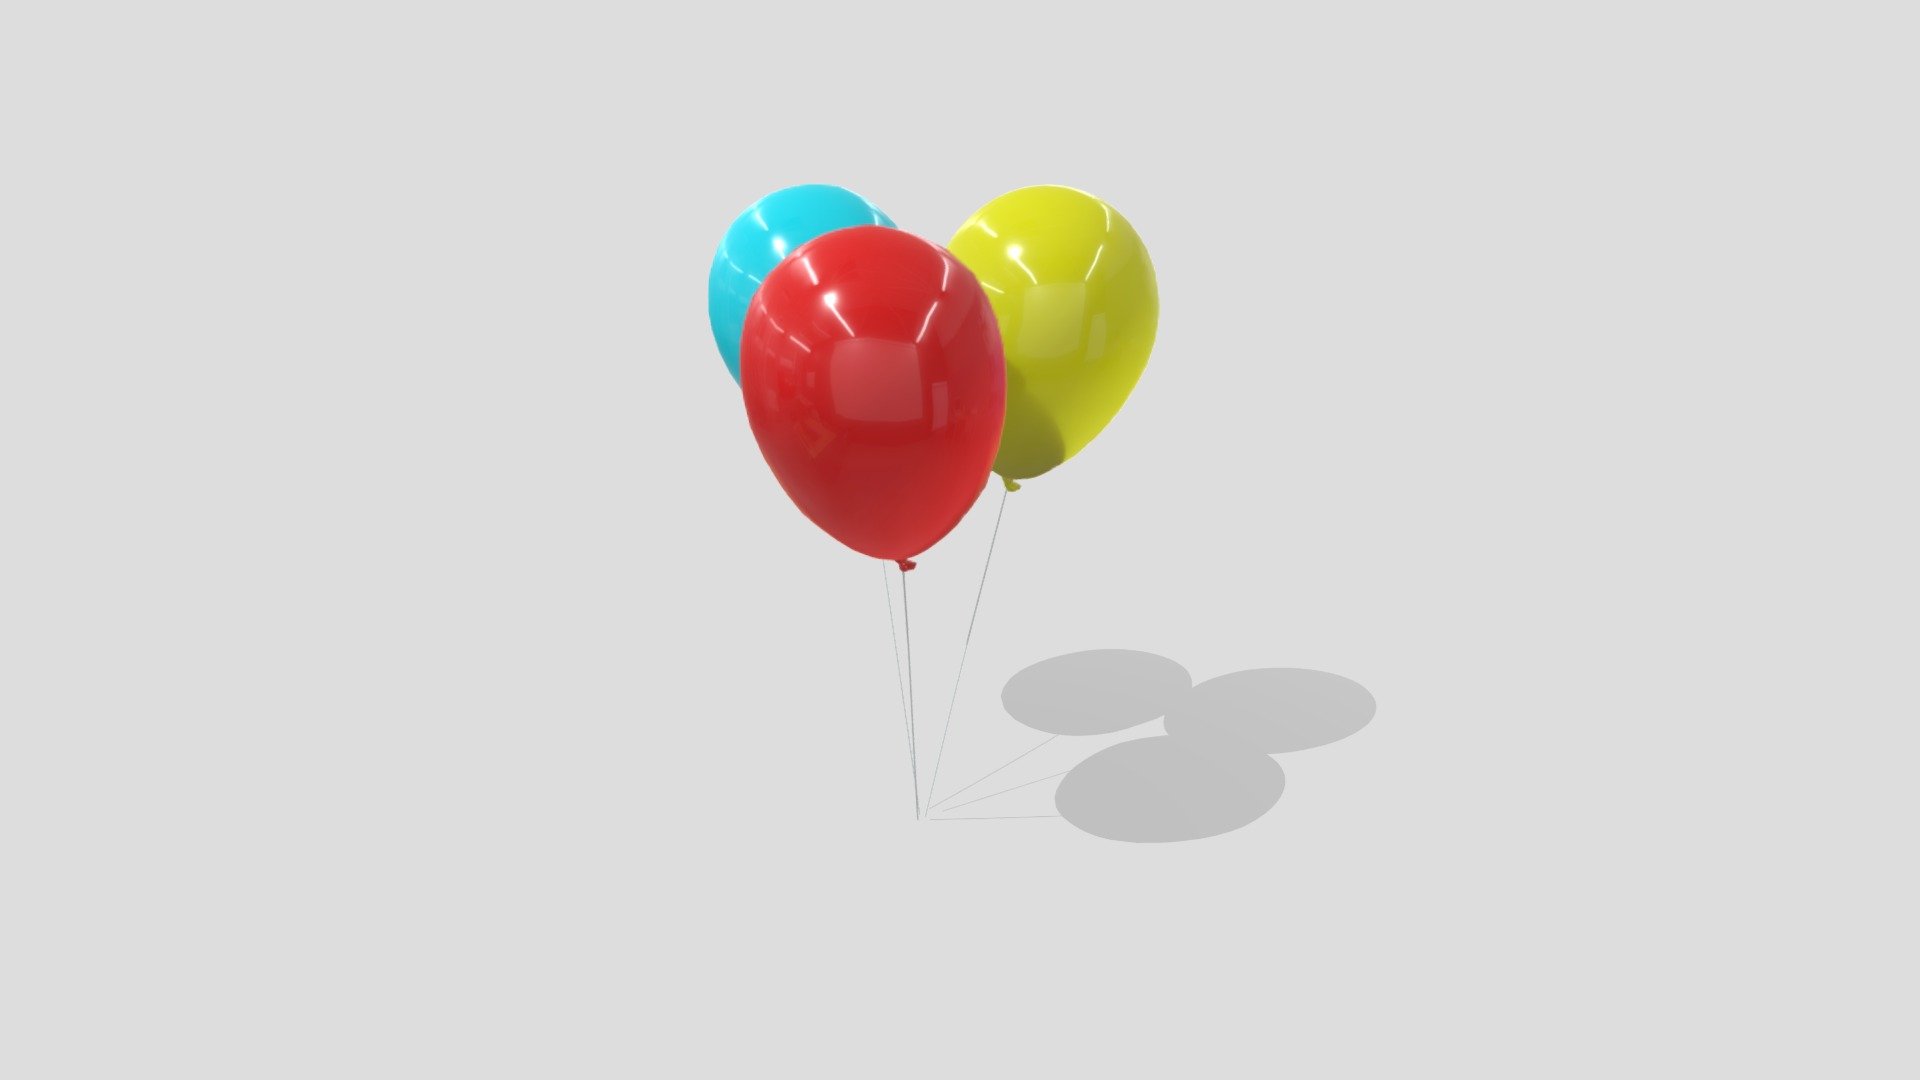 3 balloons simulation. each pulled by a short string. Exported by Alembic(.abc), 

it's not an easy task&hellip;it's a brain-burning job&hellip;

hope you like it.

Other works https://skfb.ly/osqQZ

*Hope you like my other works too*

destruction
https://sketchfab.com/PaulYang/collections/destruction

Balloons
https://sketchfab.com/PaulYang/collections/balloons

Feather
https://sketchfab.com/PaulYang/collections/feather - Balloon 01 3 Looping - Buy Royalty Free 3D model by paulyang 3d model